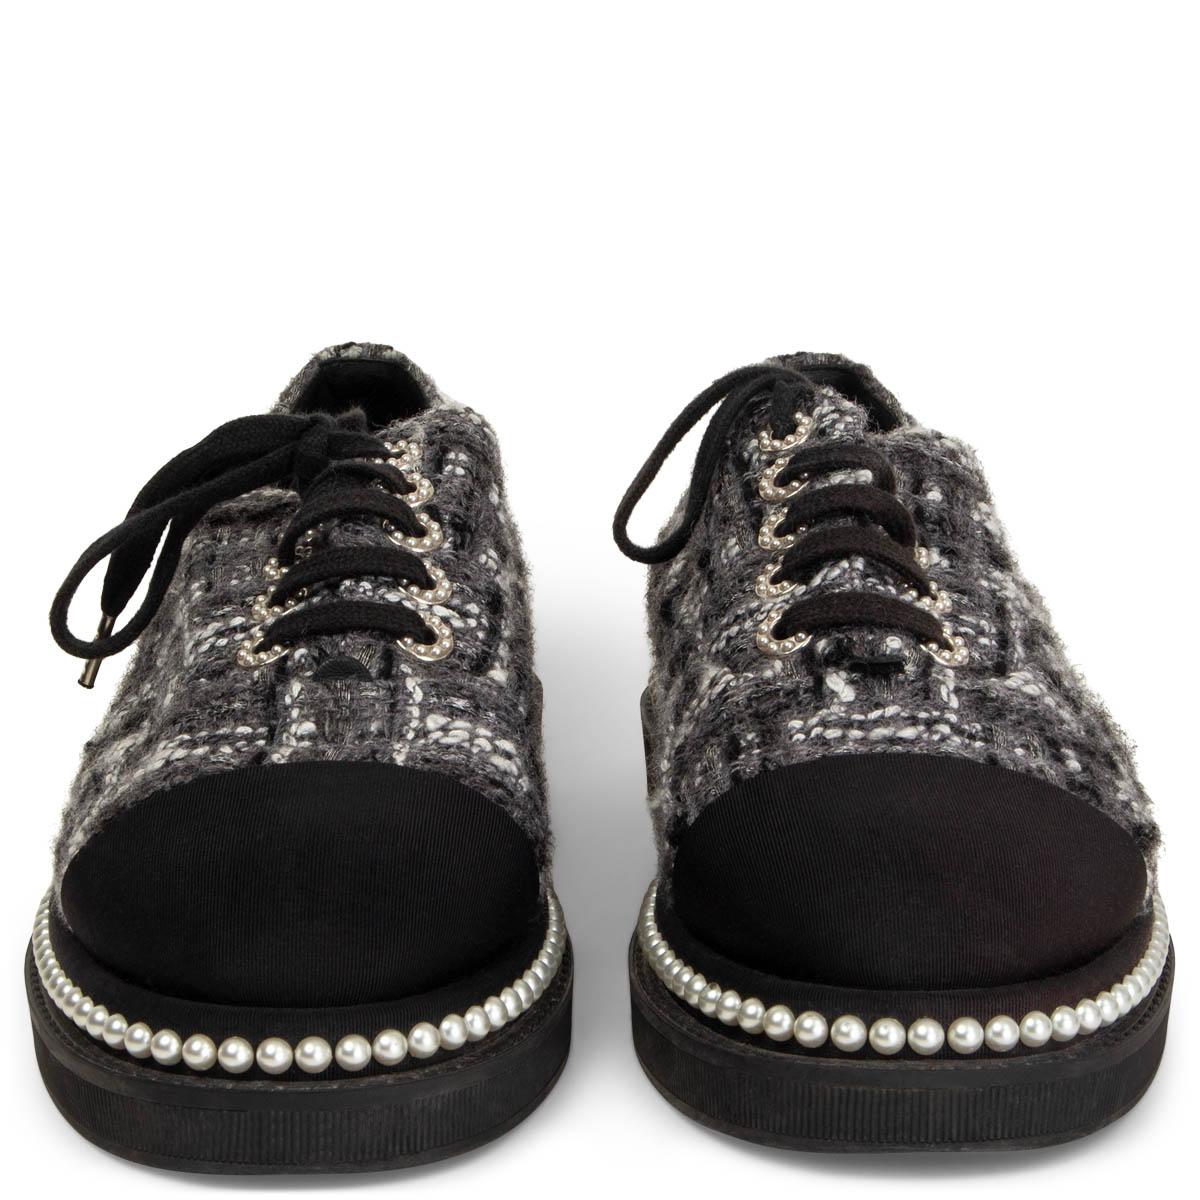 100% authentic Chanel dress shoes in grey and white tweed and a black grosgrain cap. Heel with CC logo pearl embellishment and eyelets. They flaunt faux pearl trim on the midsoles and come equipped with leather lined insoles and solid rubber soles.